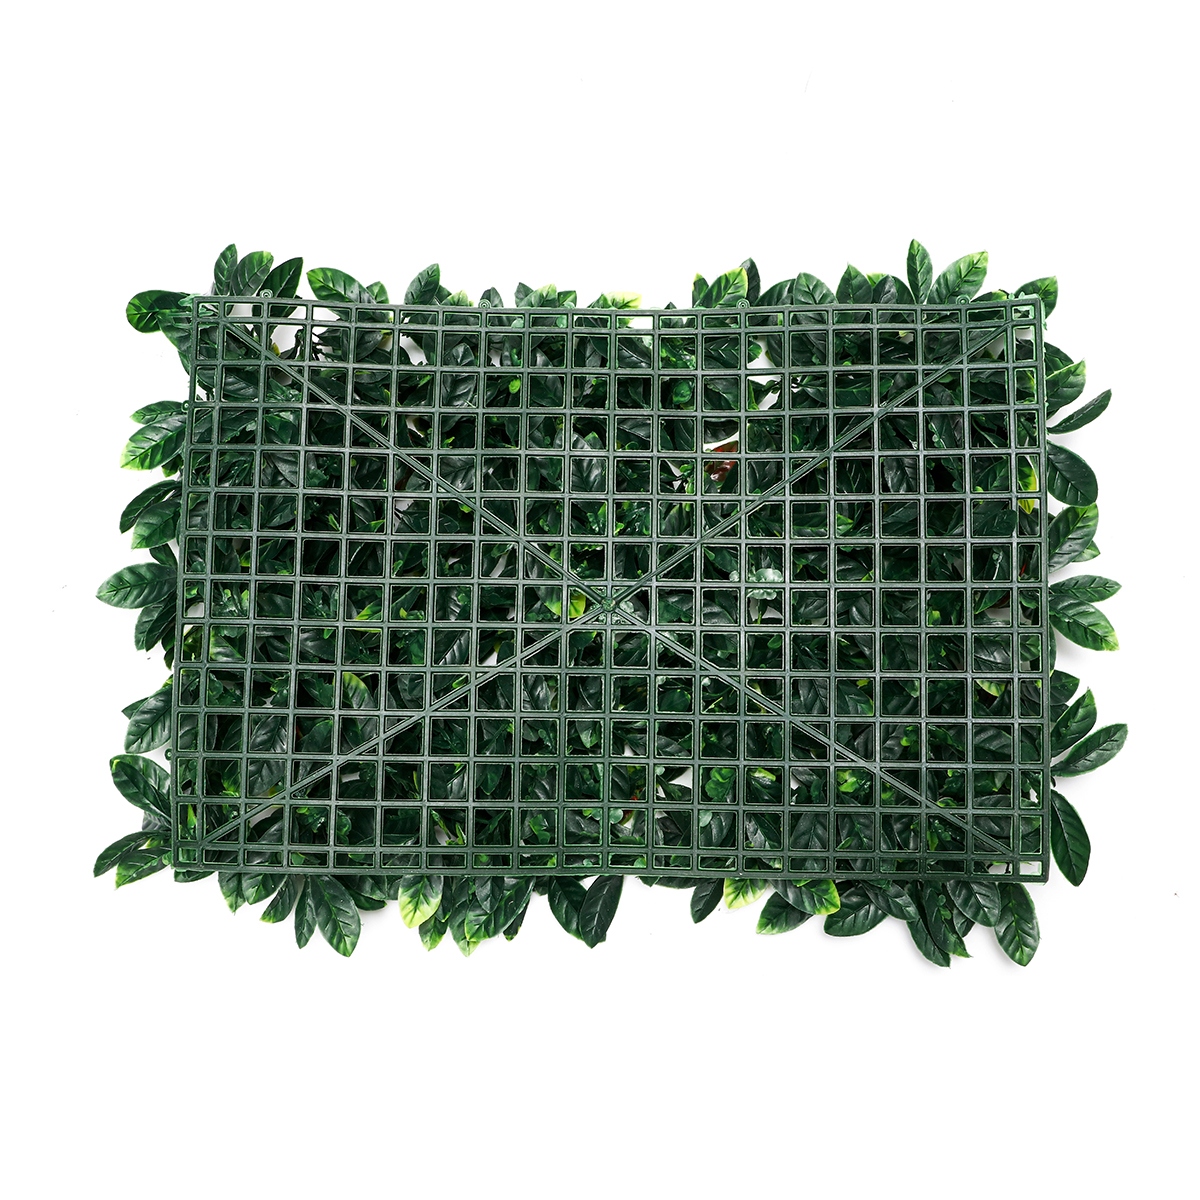 4060CM-Artificial-Topiary-Hedges-Panels-Plastic-Faux-Shrubs-Fence-Mat-Greenery-Wall-Backdrop-Decor-G-1729461-15